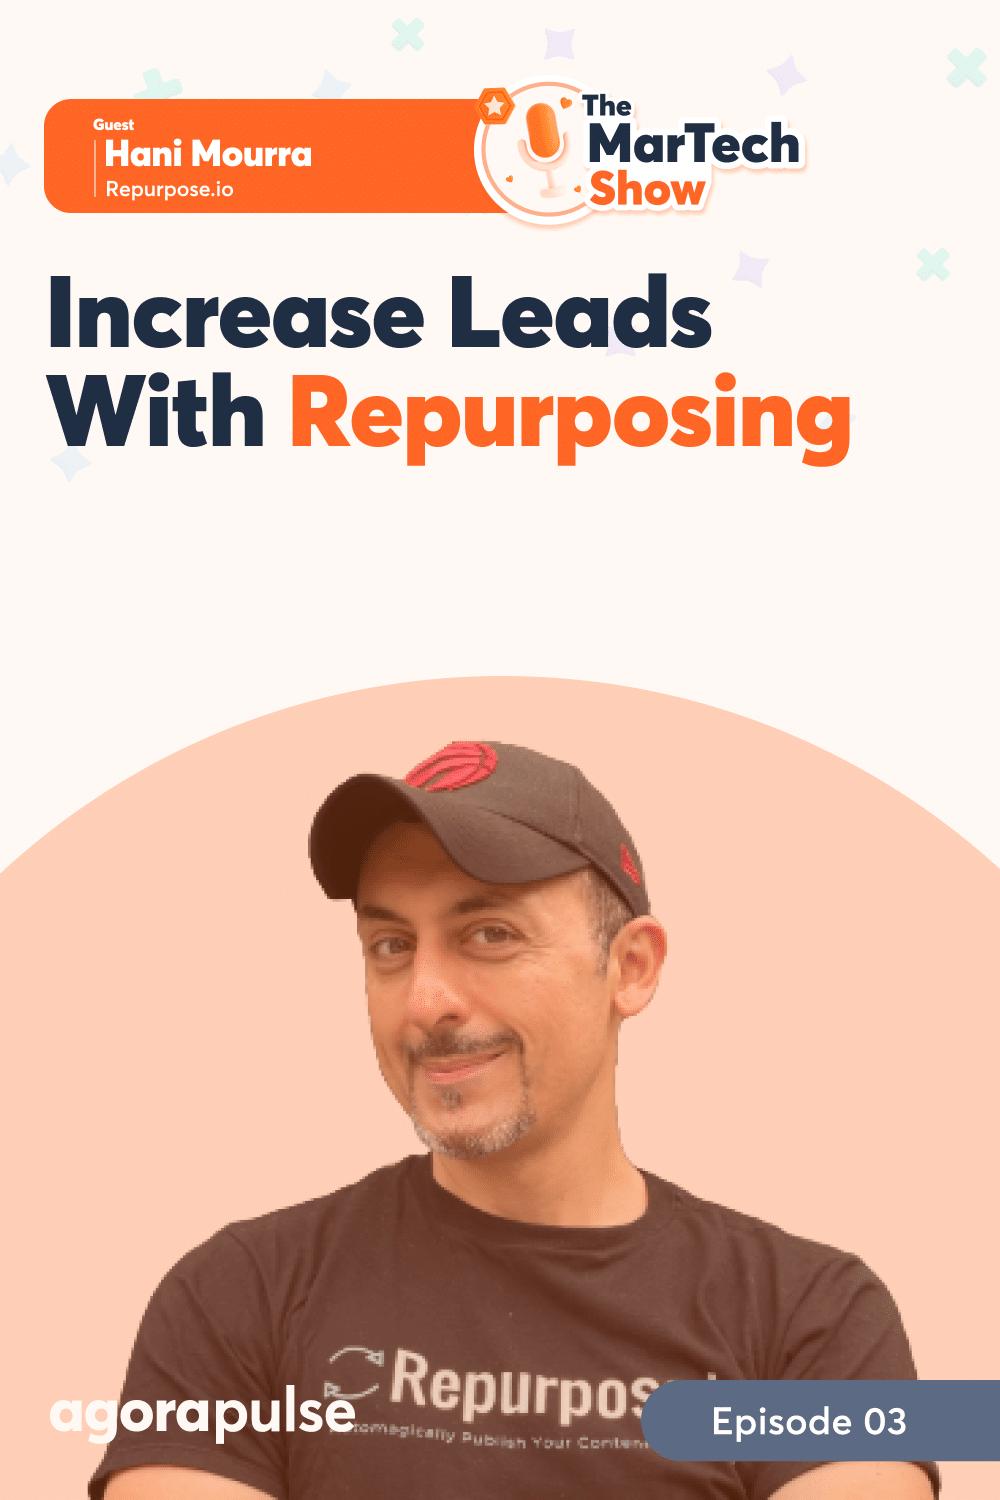 Save Time and Increase Leads With a Robust Distribution and Repurposing Tool